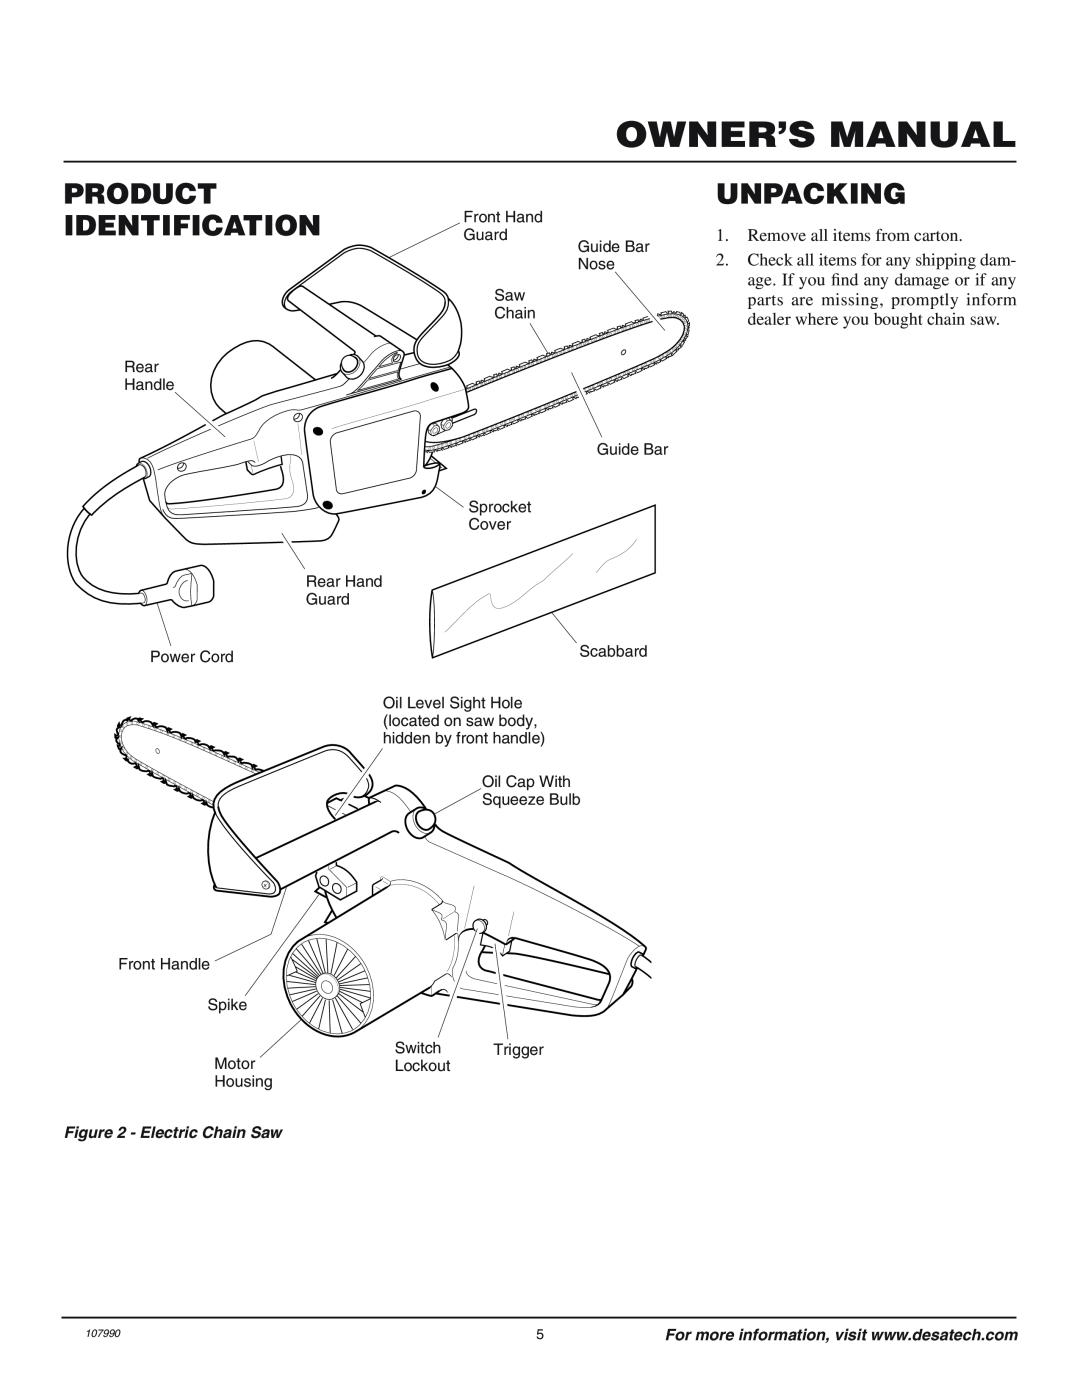 Remington owner manual Product, IDENTIFICATION Guard, Unpacking, Owner’S Manual, Electric Chain Saw 